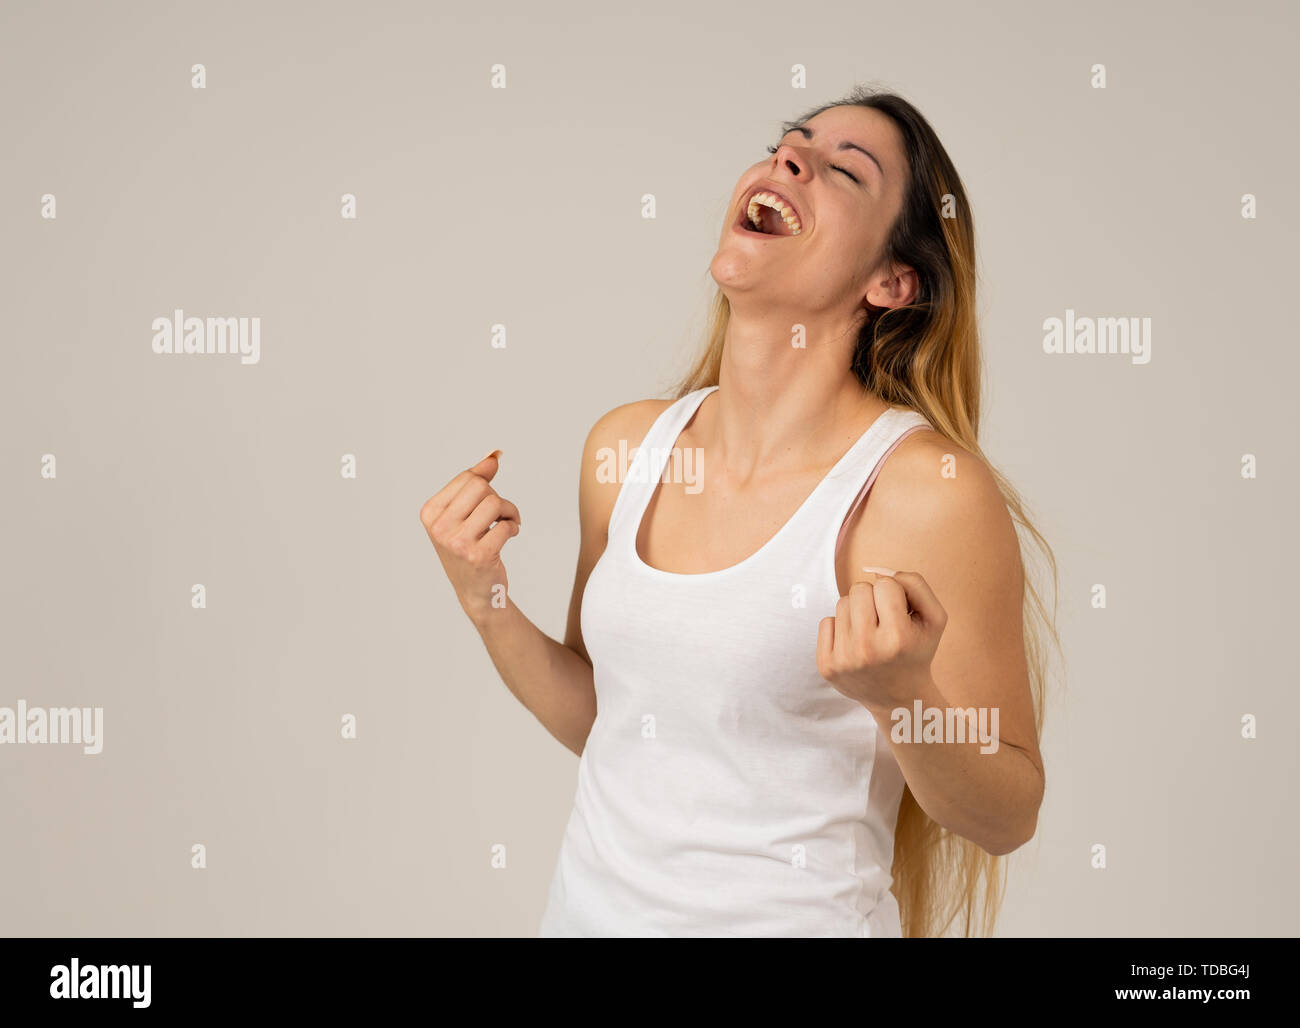 Portrait of beautiful shocked teenager girl winning or having great success with surprised and happy face feeling so excited. Human Expression Positiv Stock Photo